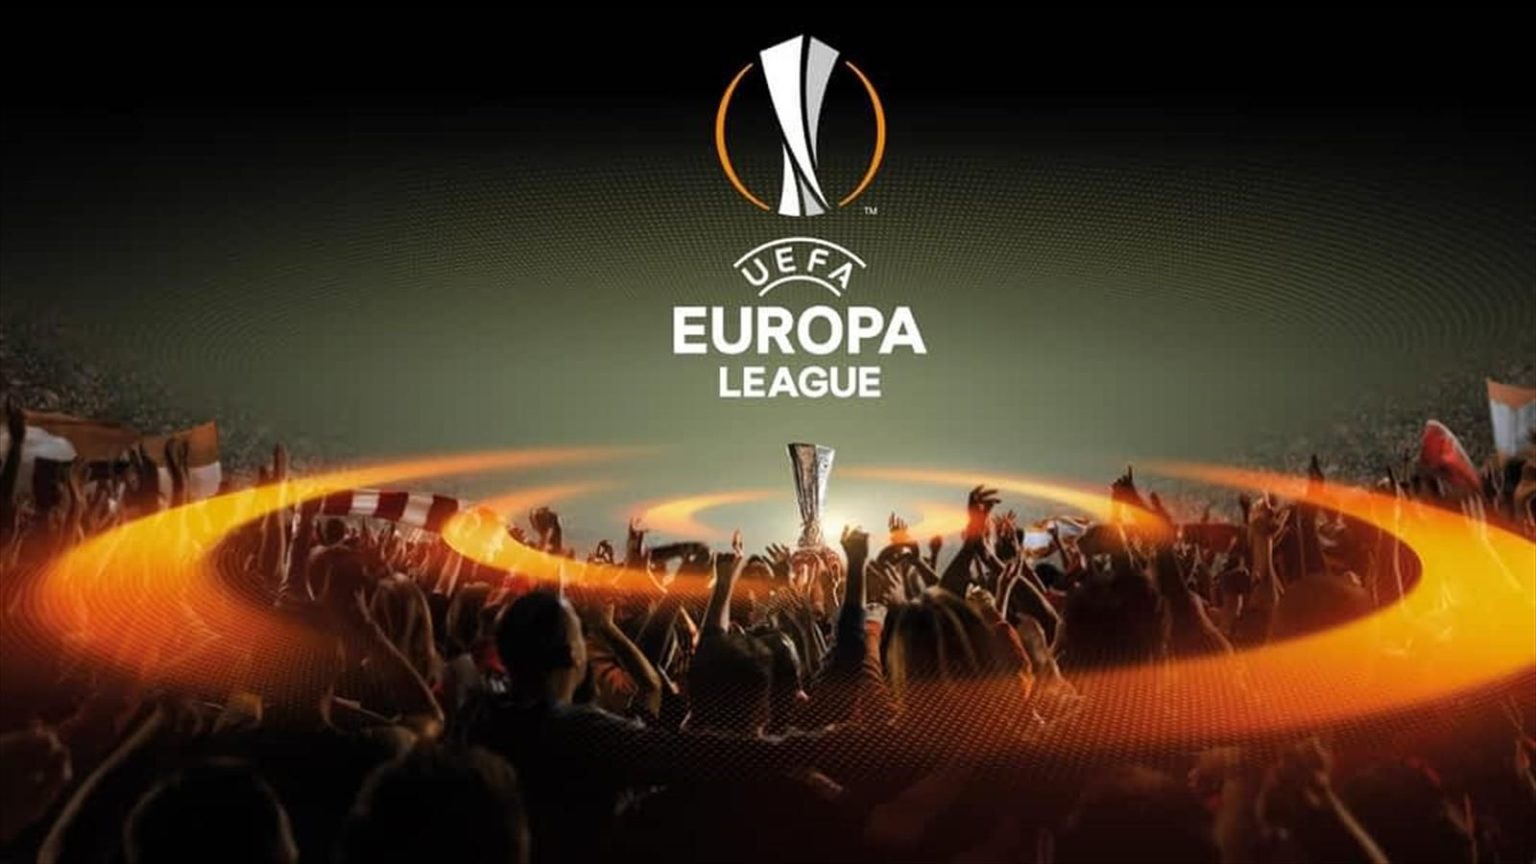 Europa League Full List Of Teams That Have Qualified For Last 16, Top